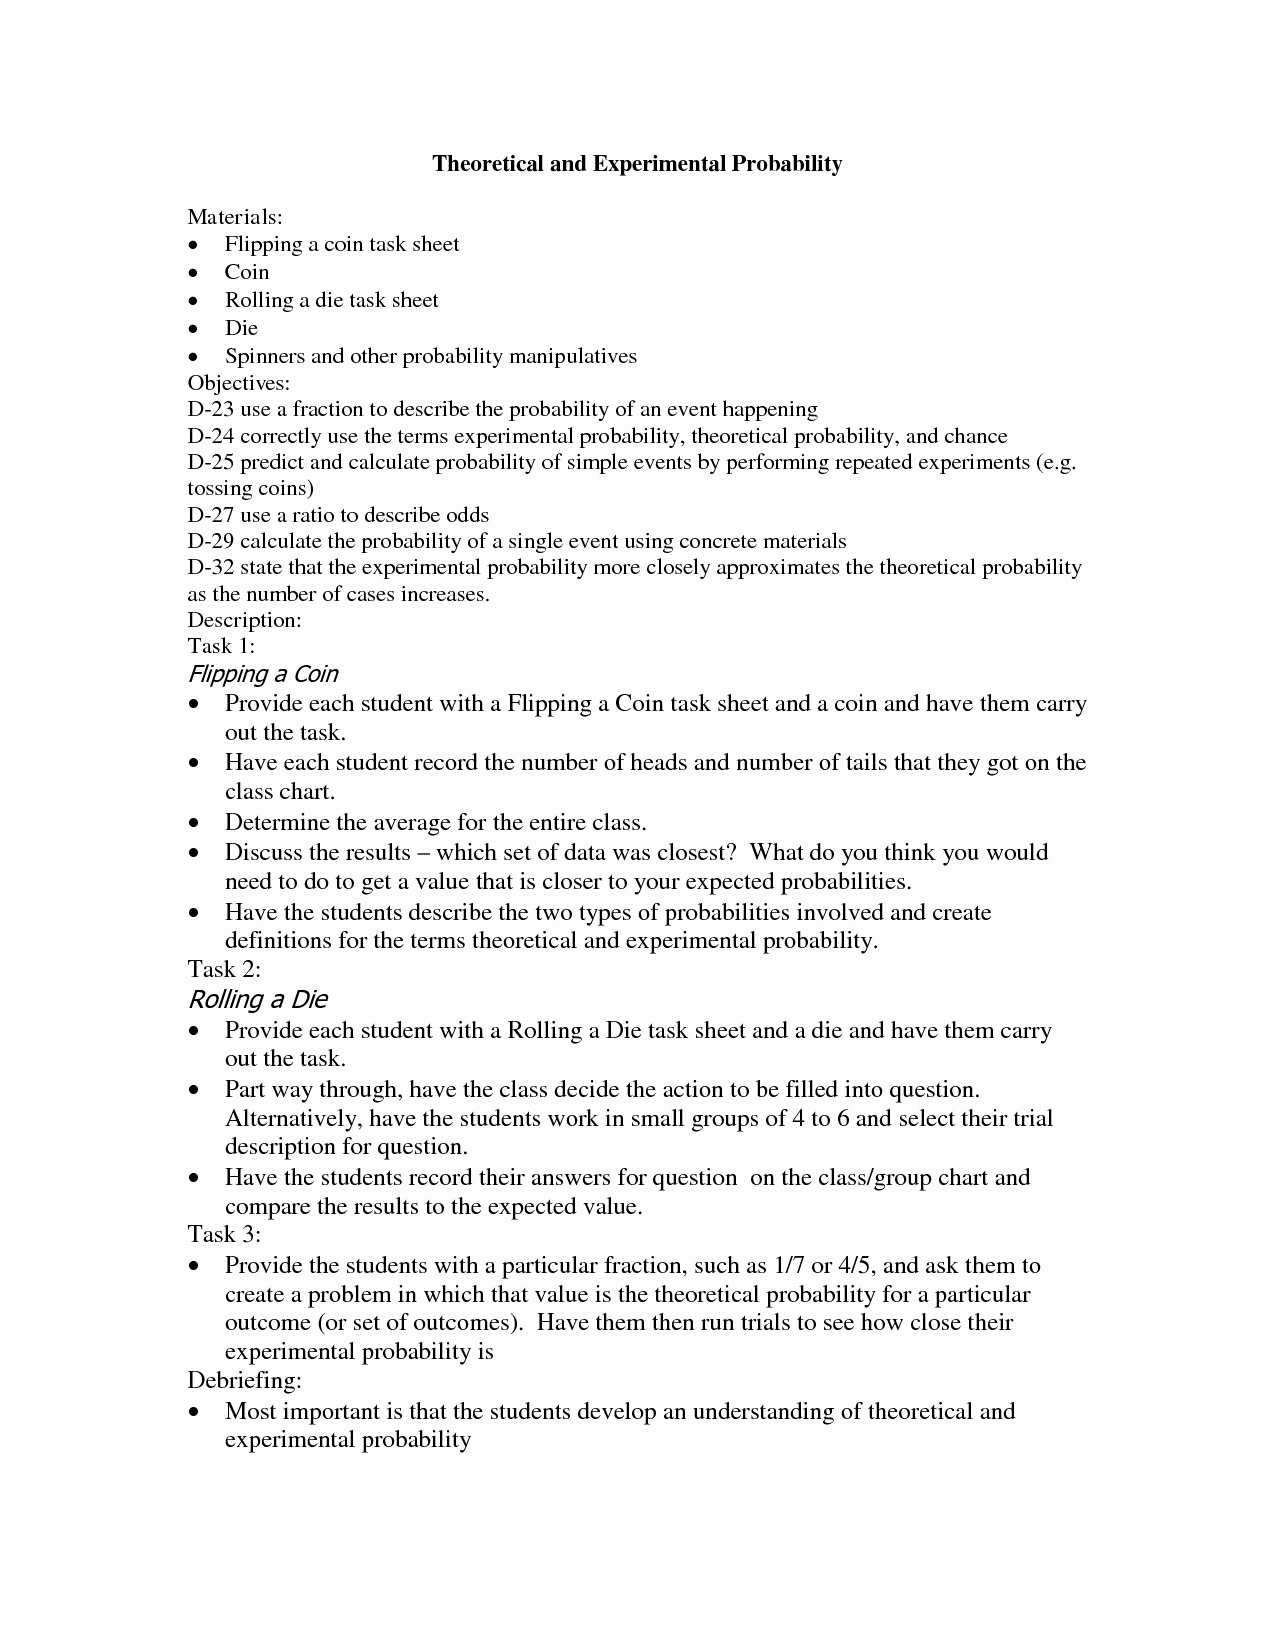 Theoretical and Experimental Probability Worksheet Luxury Probability Problems 7th Grade with Answers 7th Grade